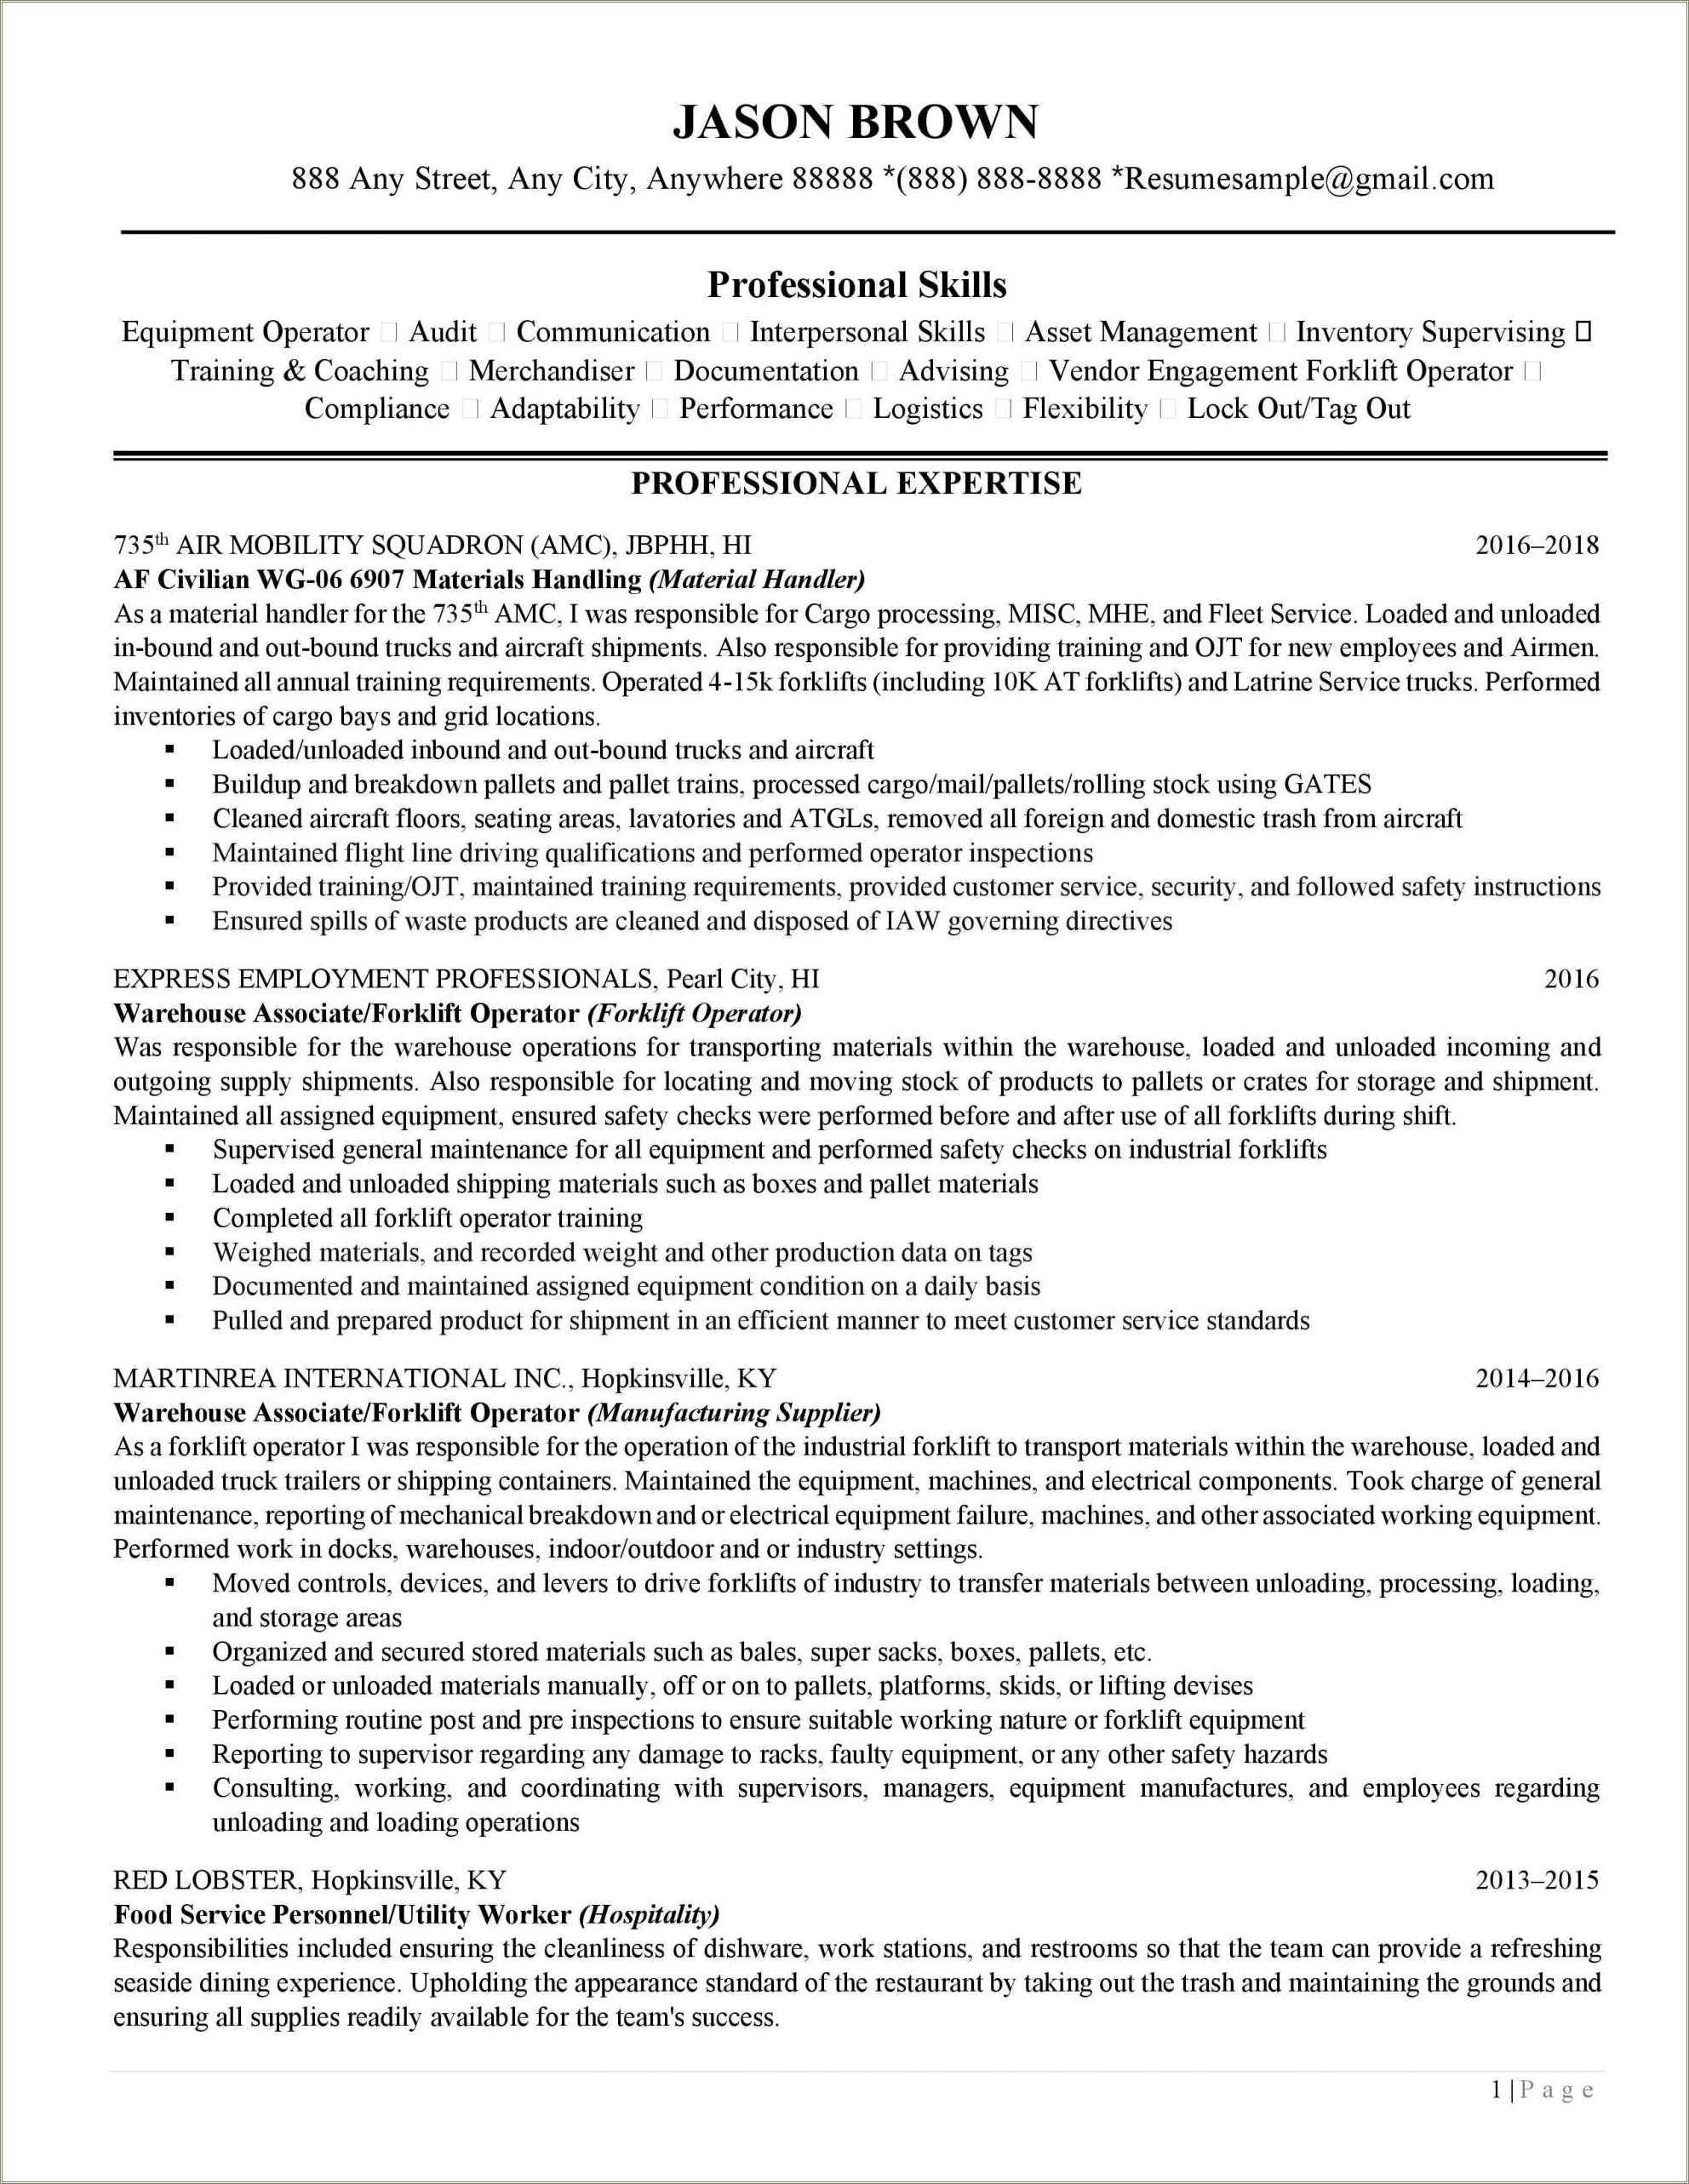 Resume Writing For Interpersonal Skills Resume Example Gallery 6835